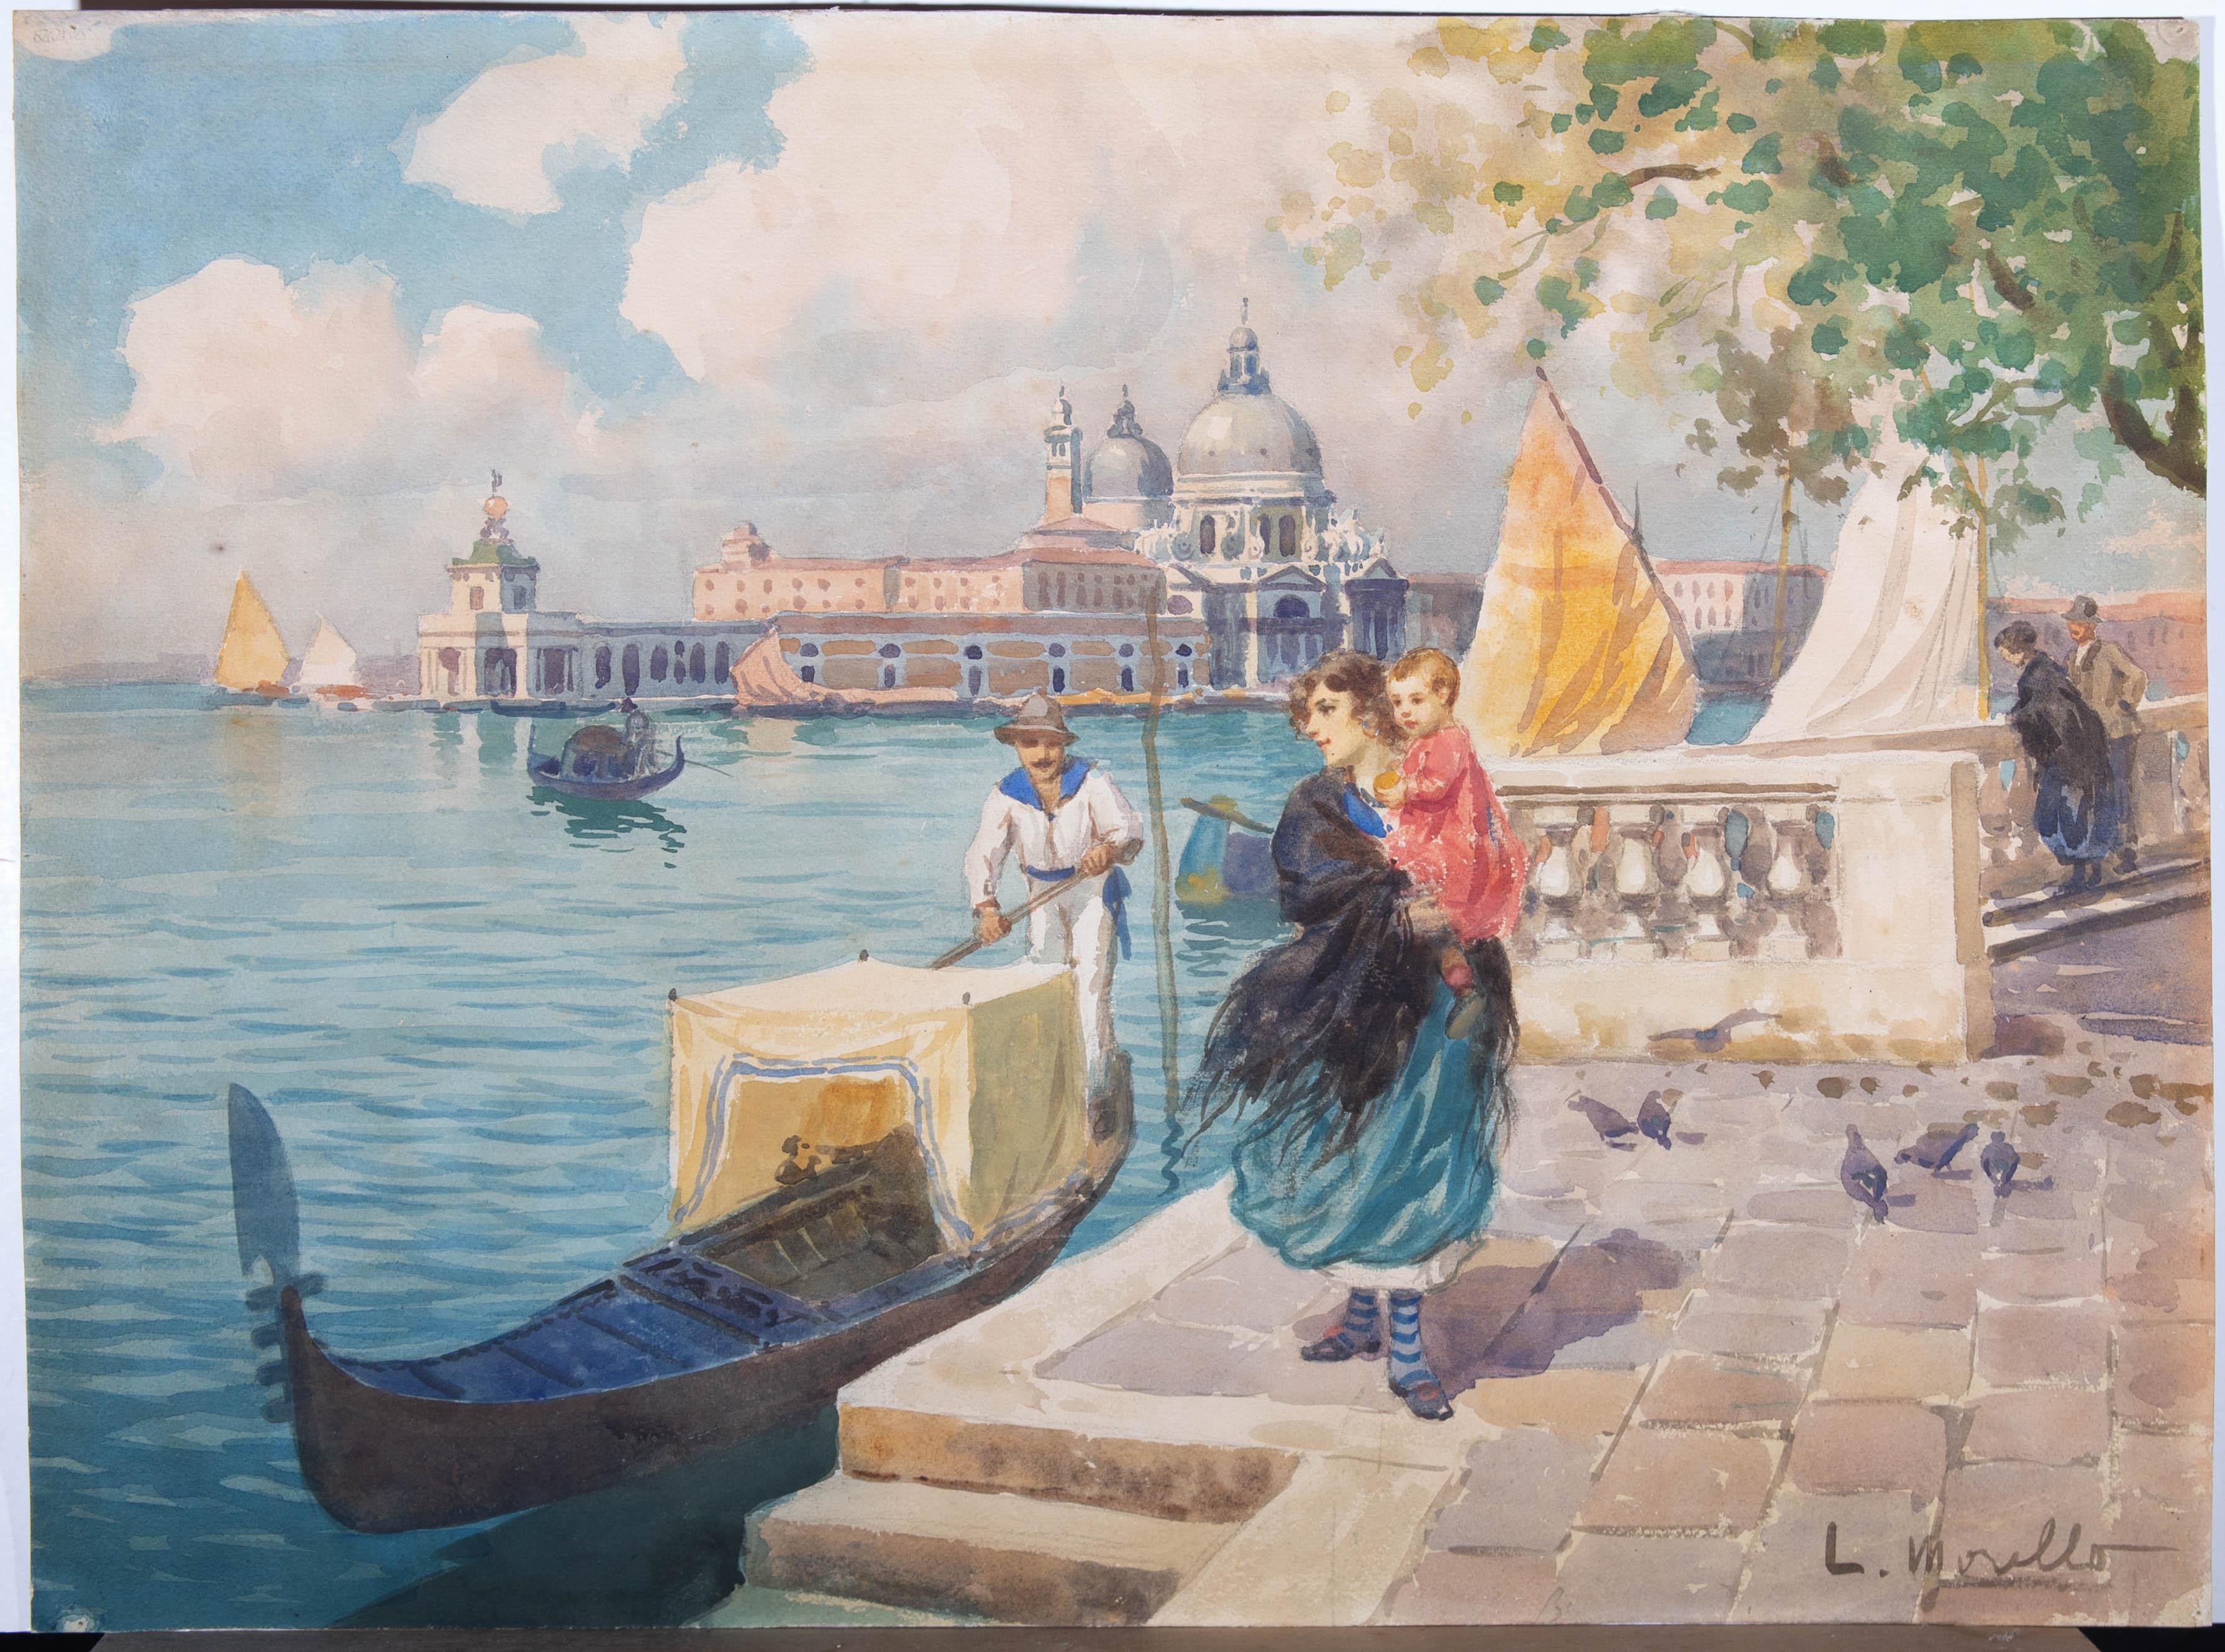 A beautiful watercolour view of the Venetian waterfront. A mother holds her child close as they stand in the warm sunshine with a gondolier approaching them in his gondola. The painting has a warm and joyful atmosphere with a gentle breeze catching